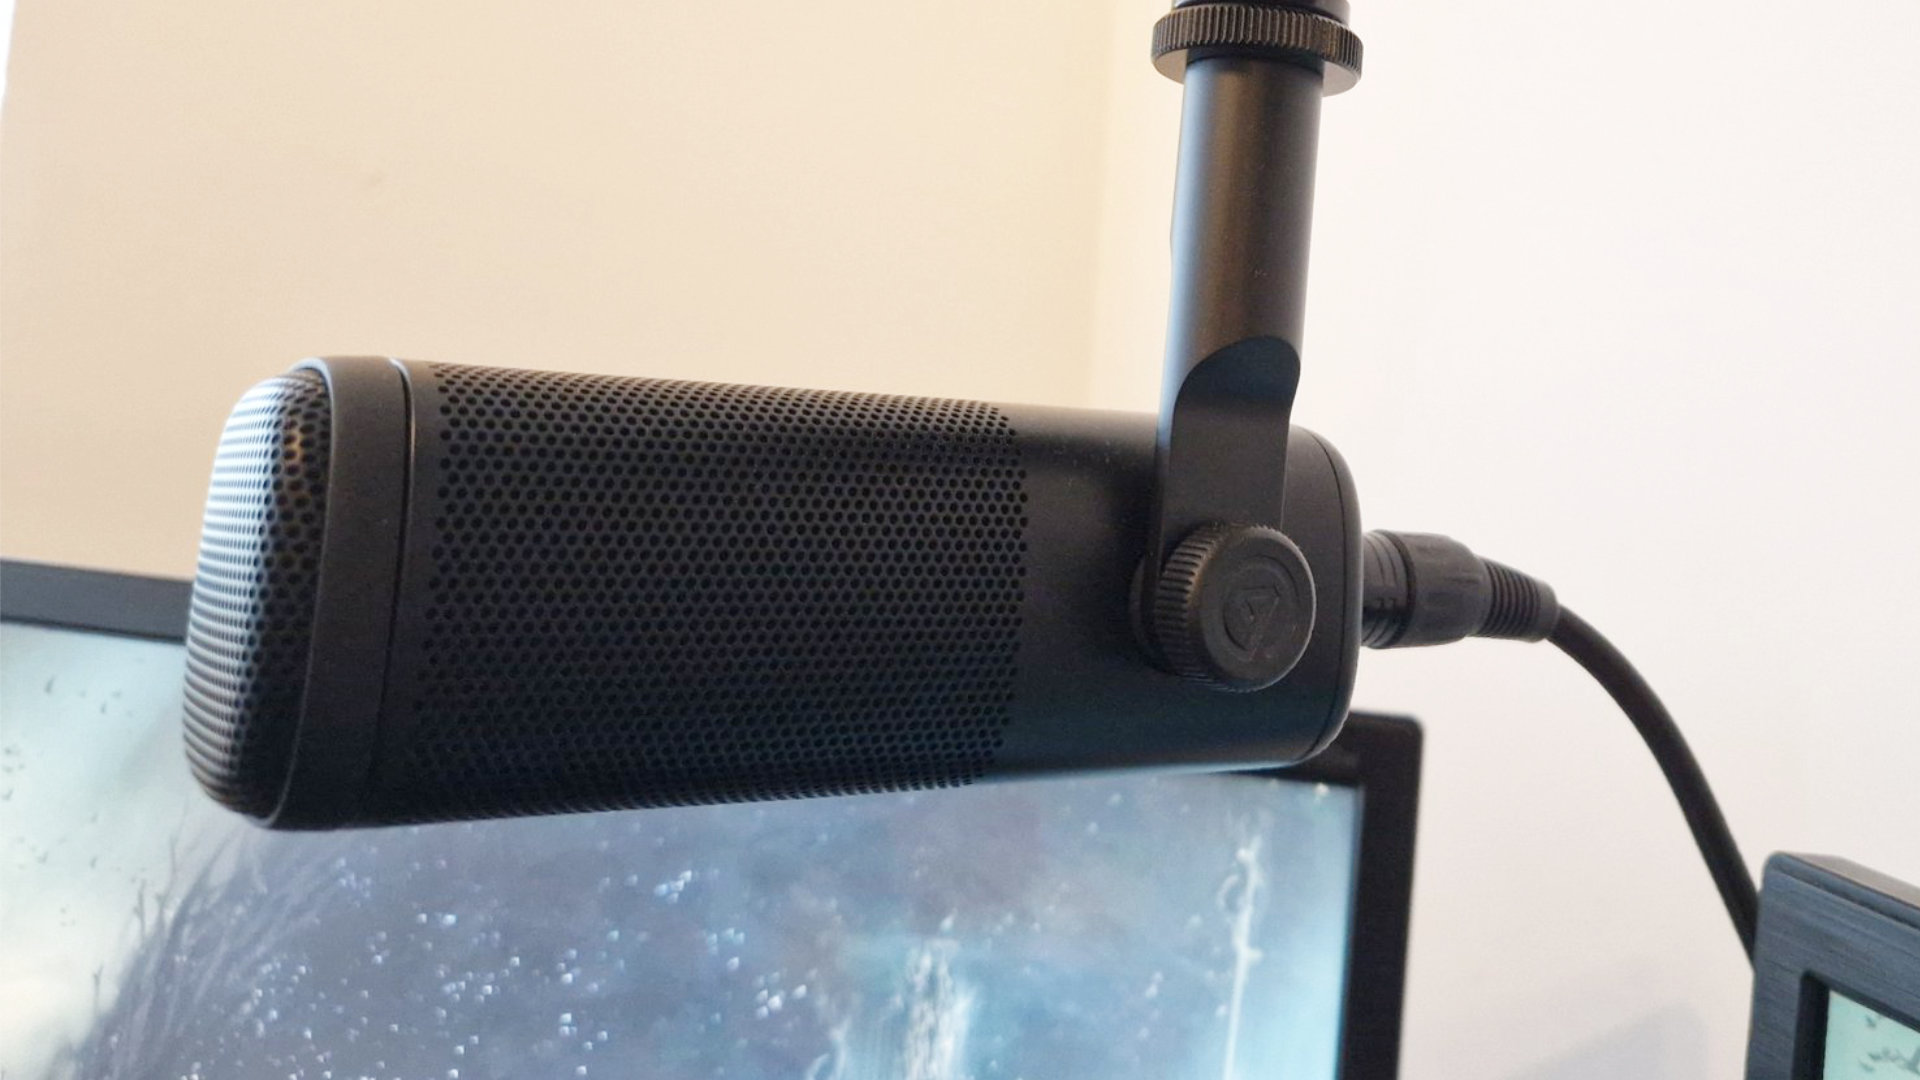 Elgato Wave DX review – the microphone a growing streamer needs